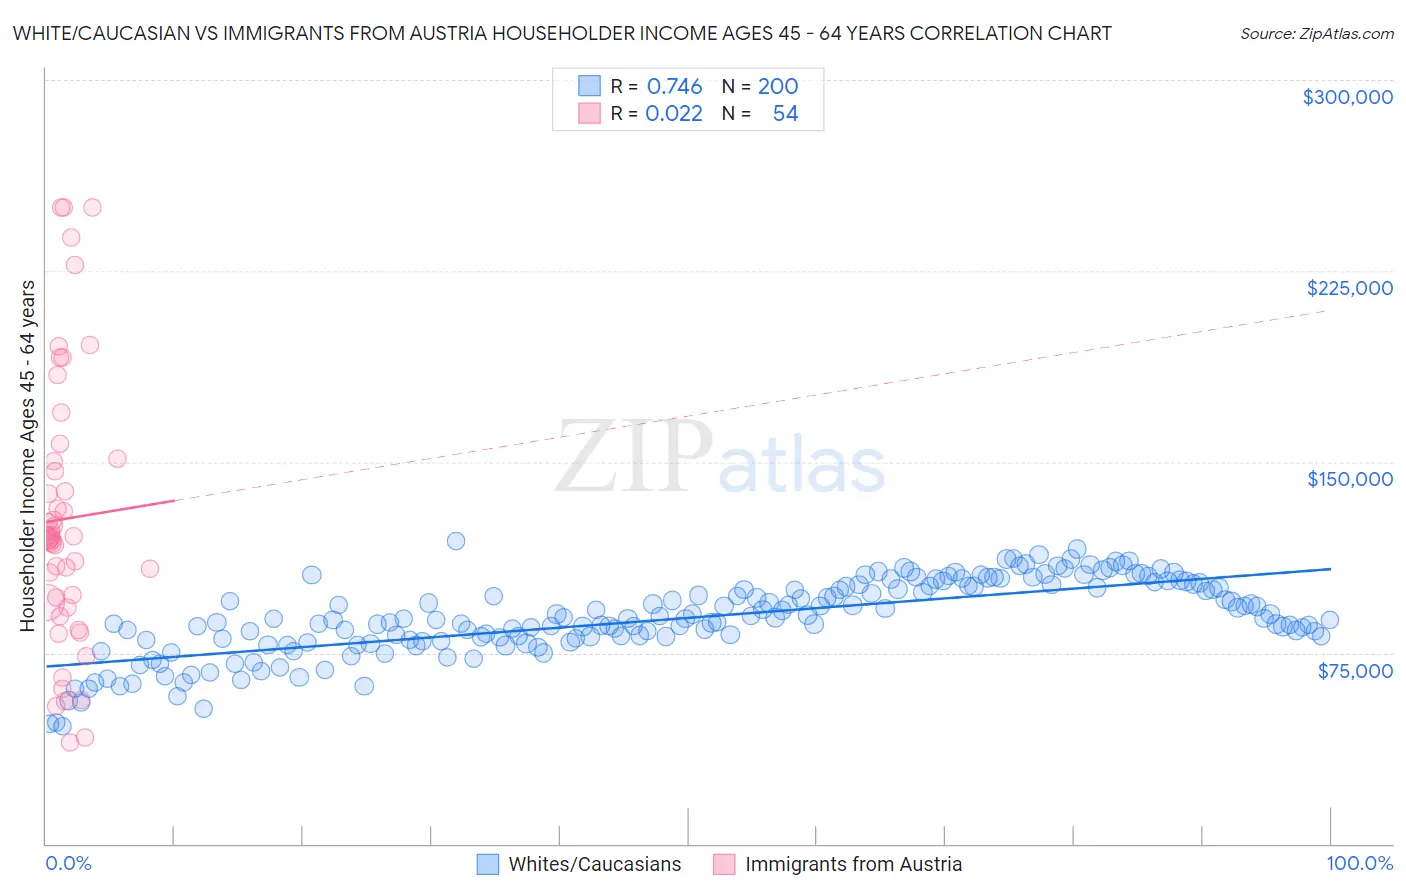 White/Caucasian vs Immigrants from Austria Householder Income Ages 45 - 64 years